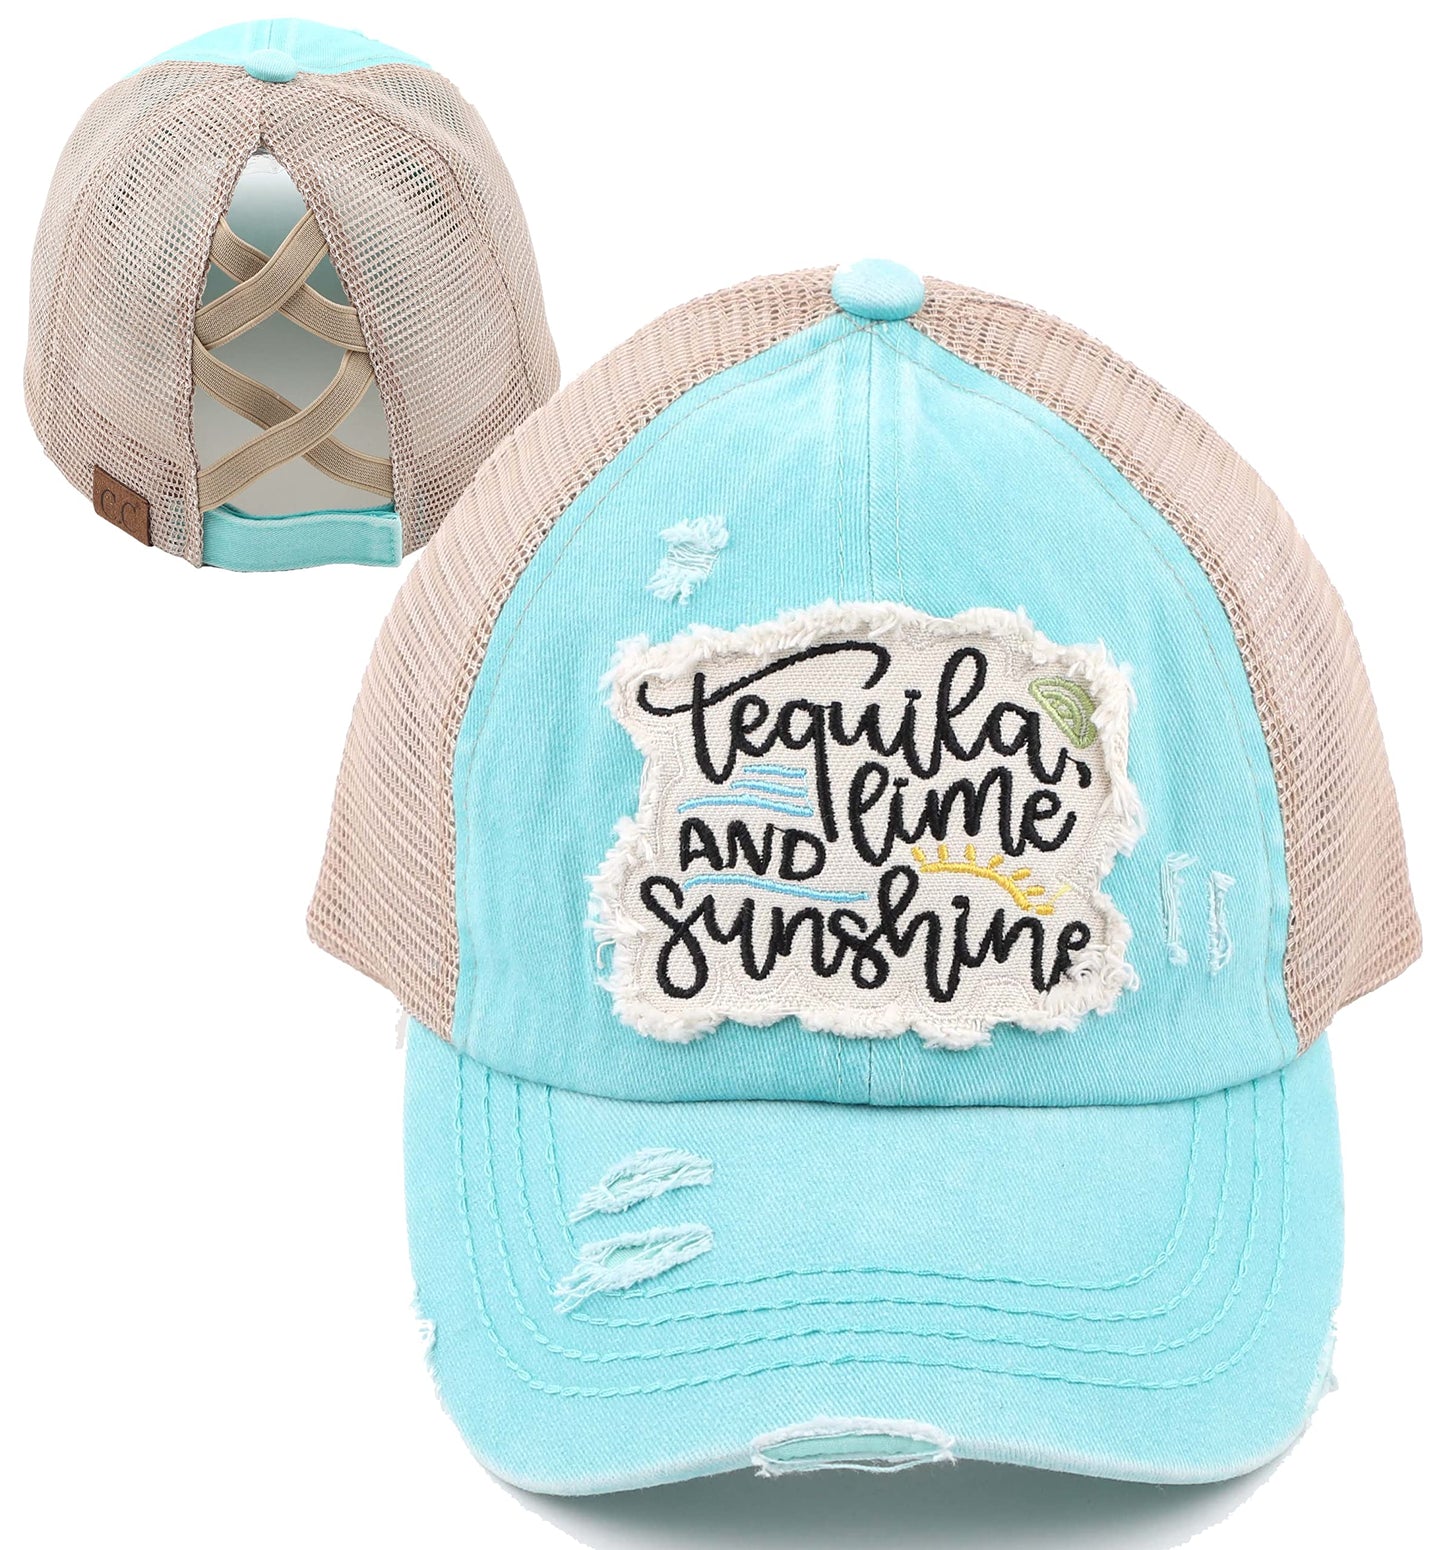 Tequila, Lime & Sunshine Criss Cross Ponytail Hat by Funky Junque